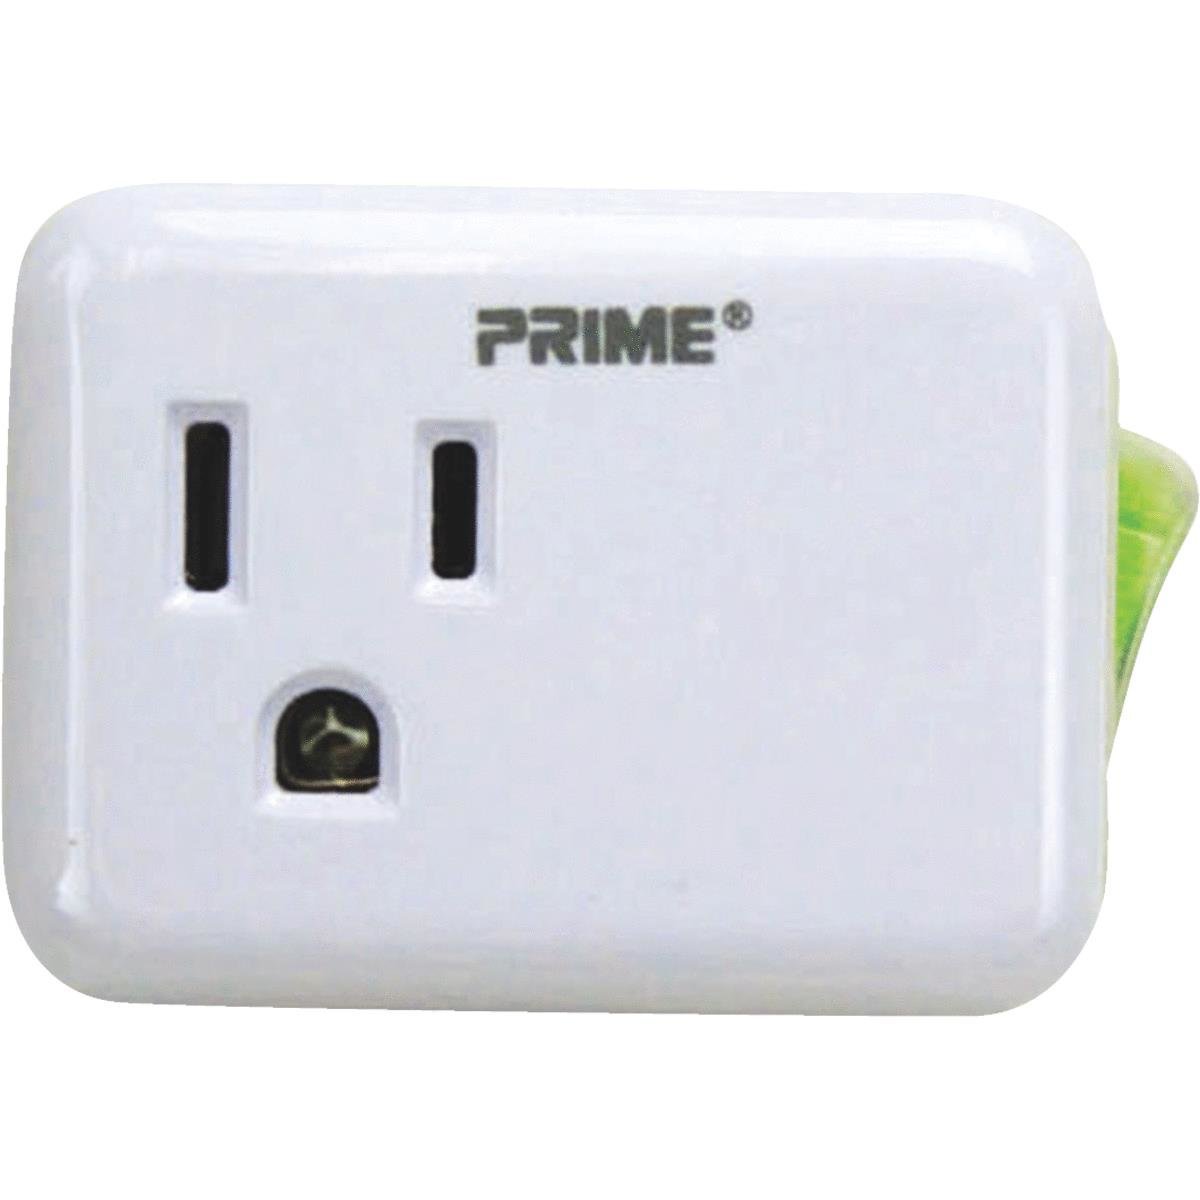 Prime Line Pbes001 125 V Outlet Energy Saver Tap With On & Off Switch, White